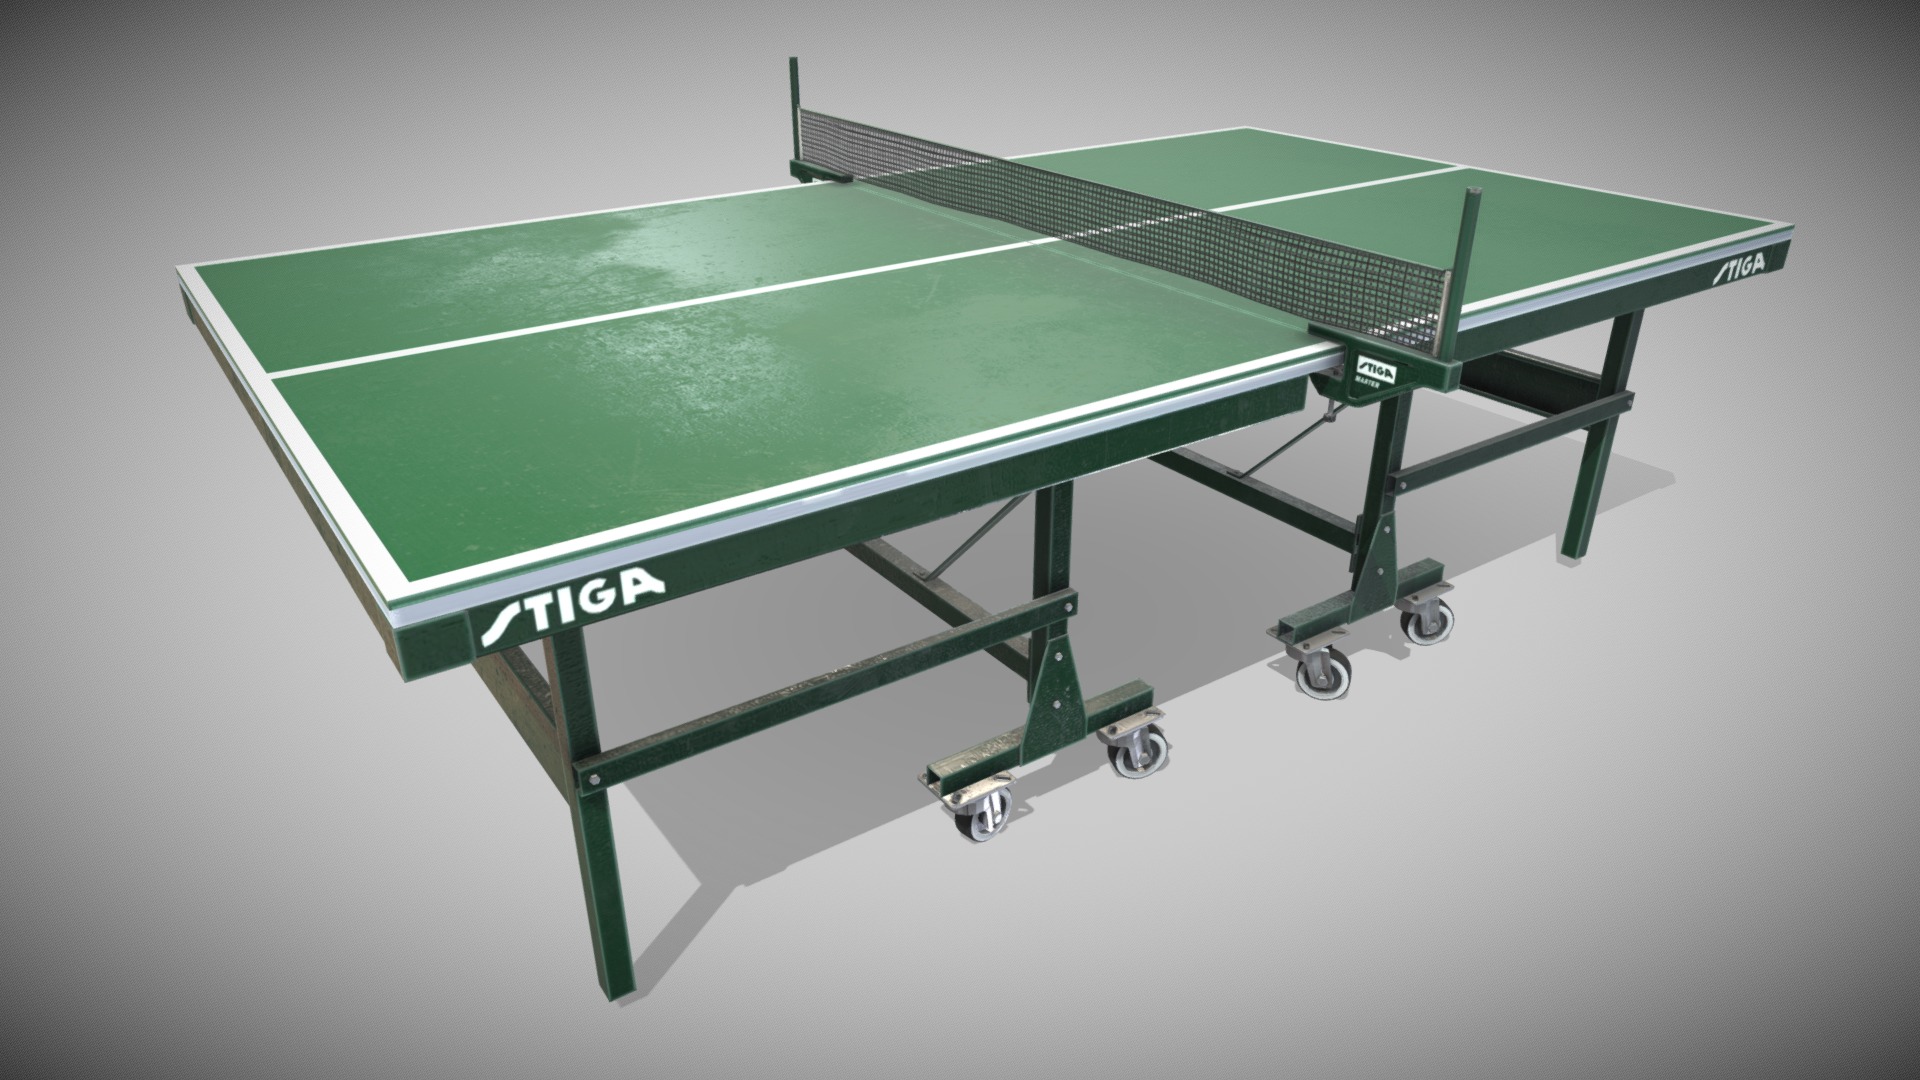 3D model Stiga Tennis Table - This is a 3D model of the Stiga Tennis Table. The 3D model is about a green table with a metal frame.